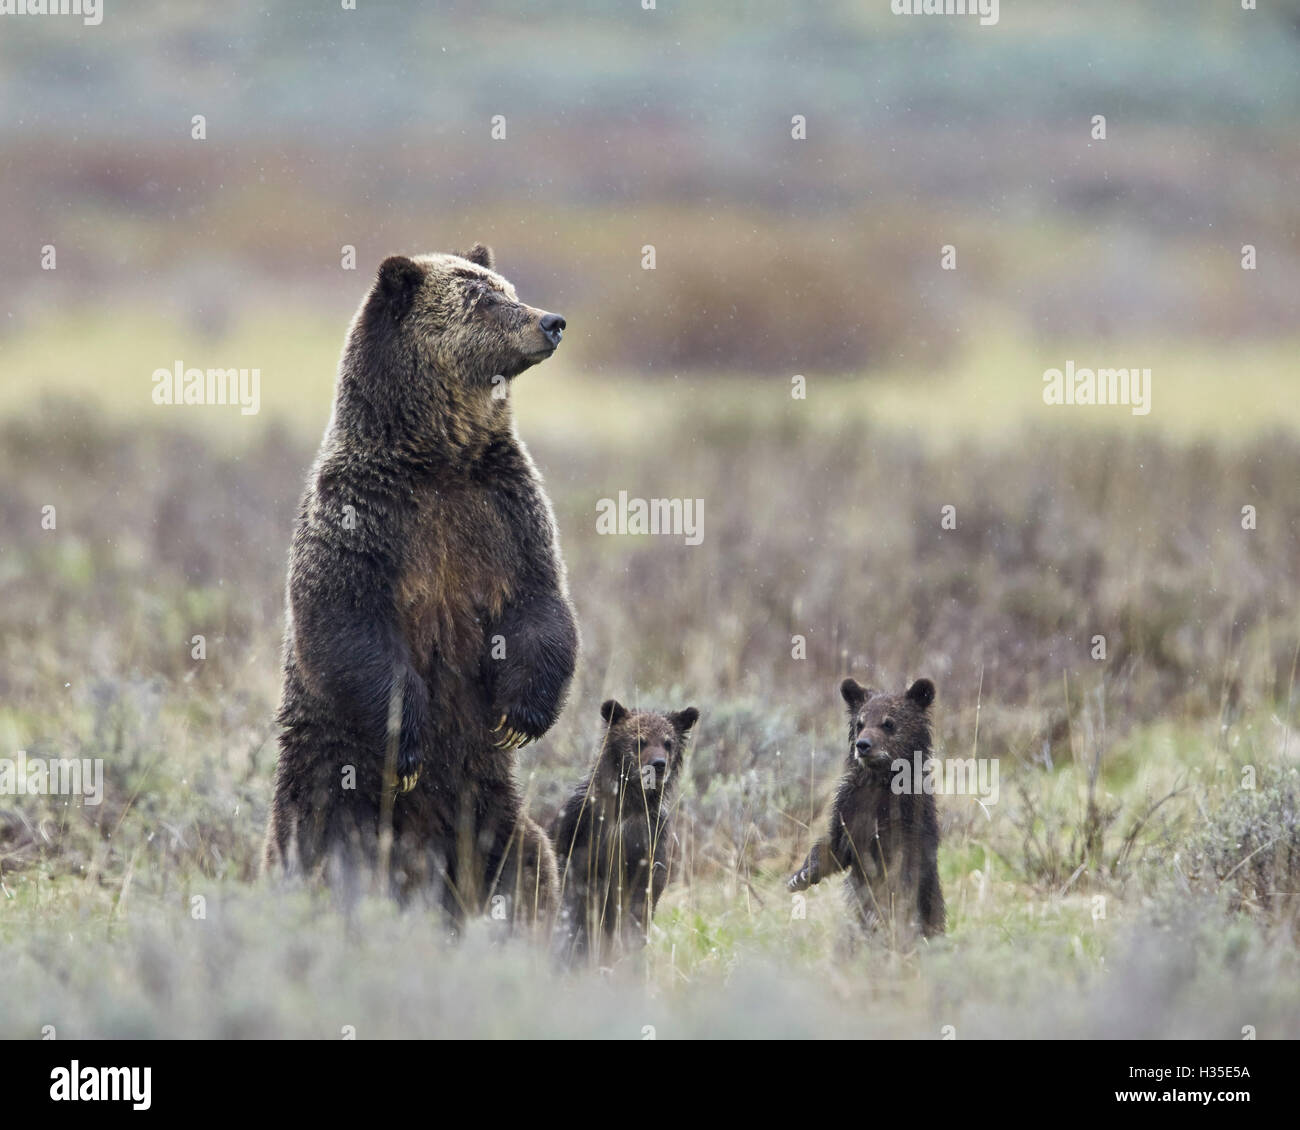 Grizzly bear sow and two cubs of the year all standing up on their hind legs, Yellowstone National Park, Wyoming, USA Stock Photo